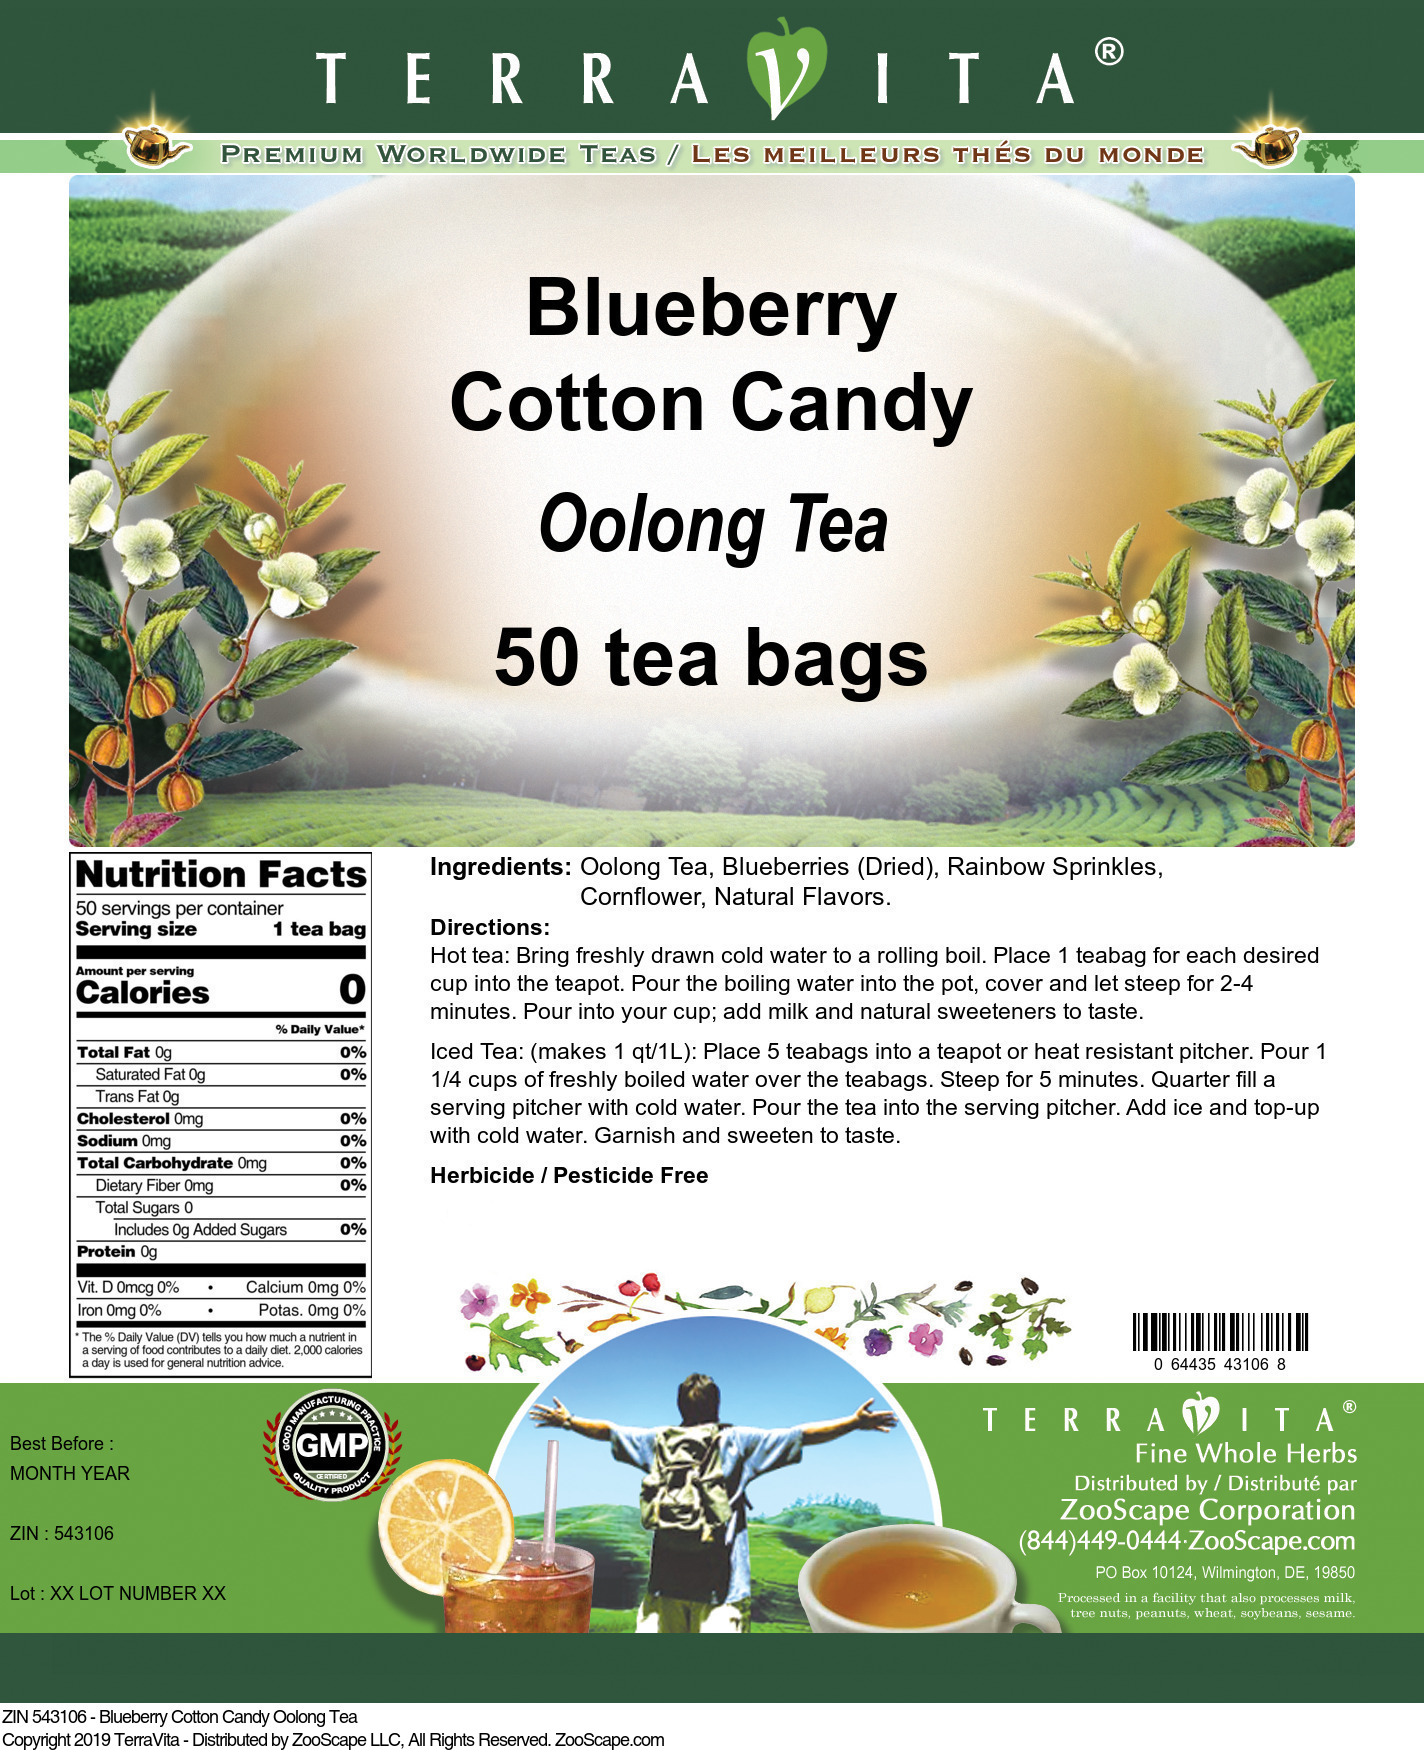 Blueberry Cotton Candy Oolong Tea - Label